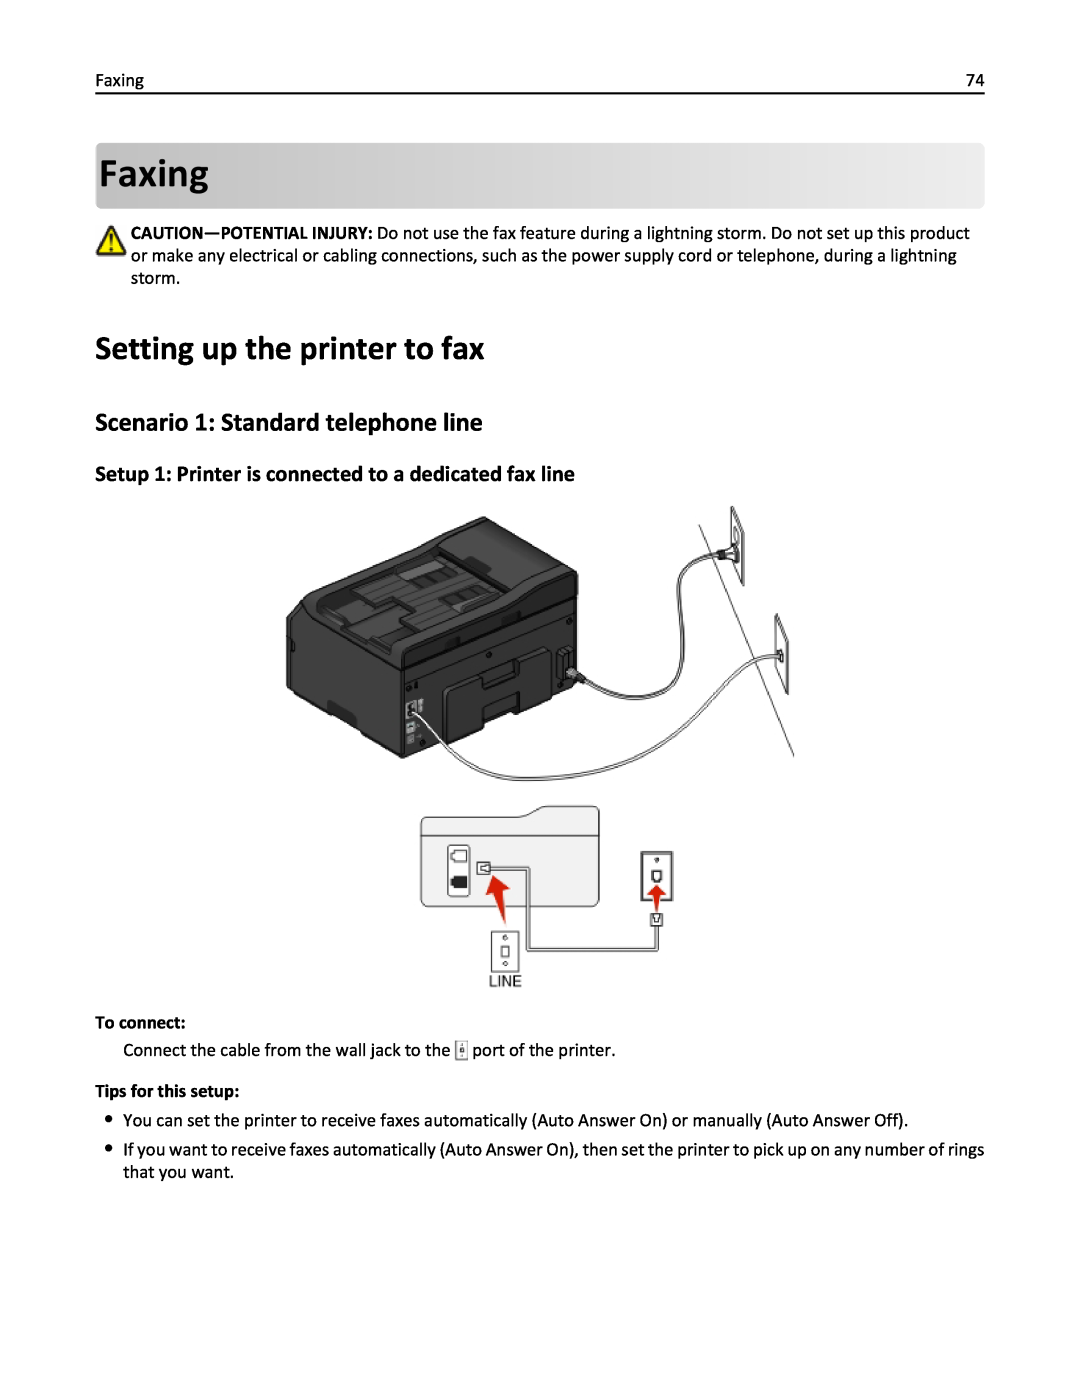 Lexmark 20E Faxing, Setting up the printer to fax, Scenario 1: Standard telephone line, To connect, Tips for this setup 